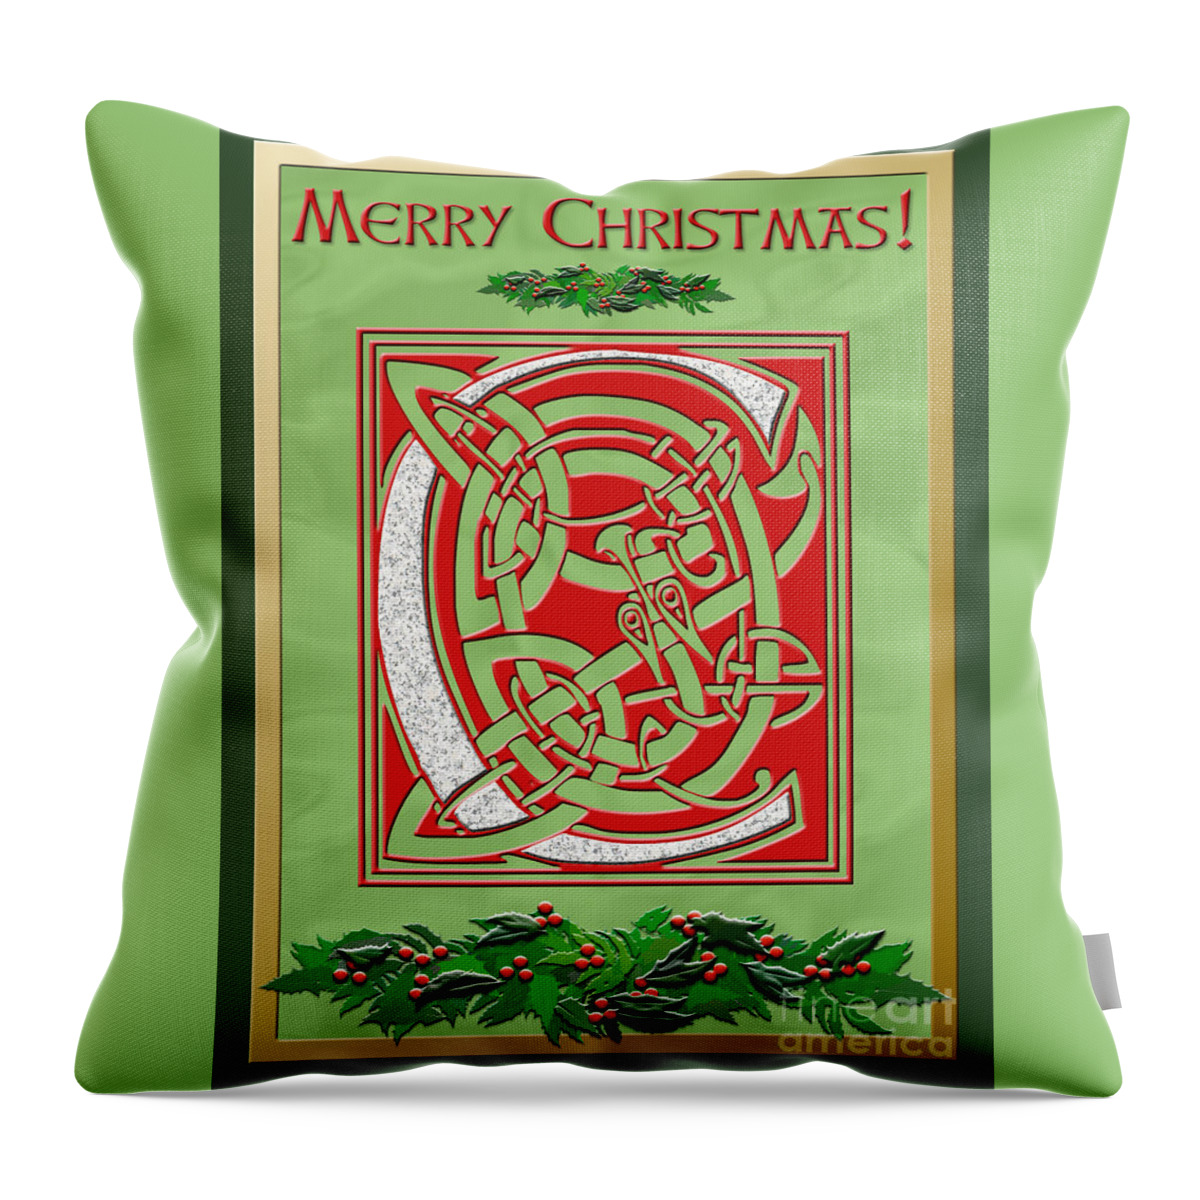 Monogram Throw Pillow featuring the digital art Celtic Christmas C Initial by Melissa A Benson